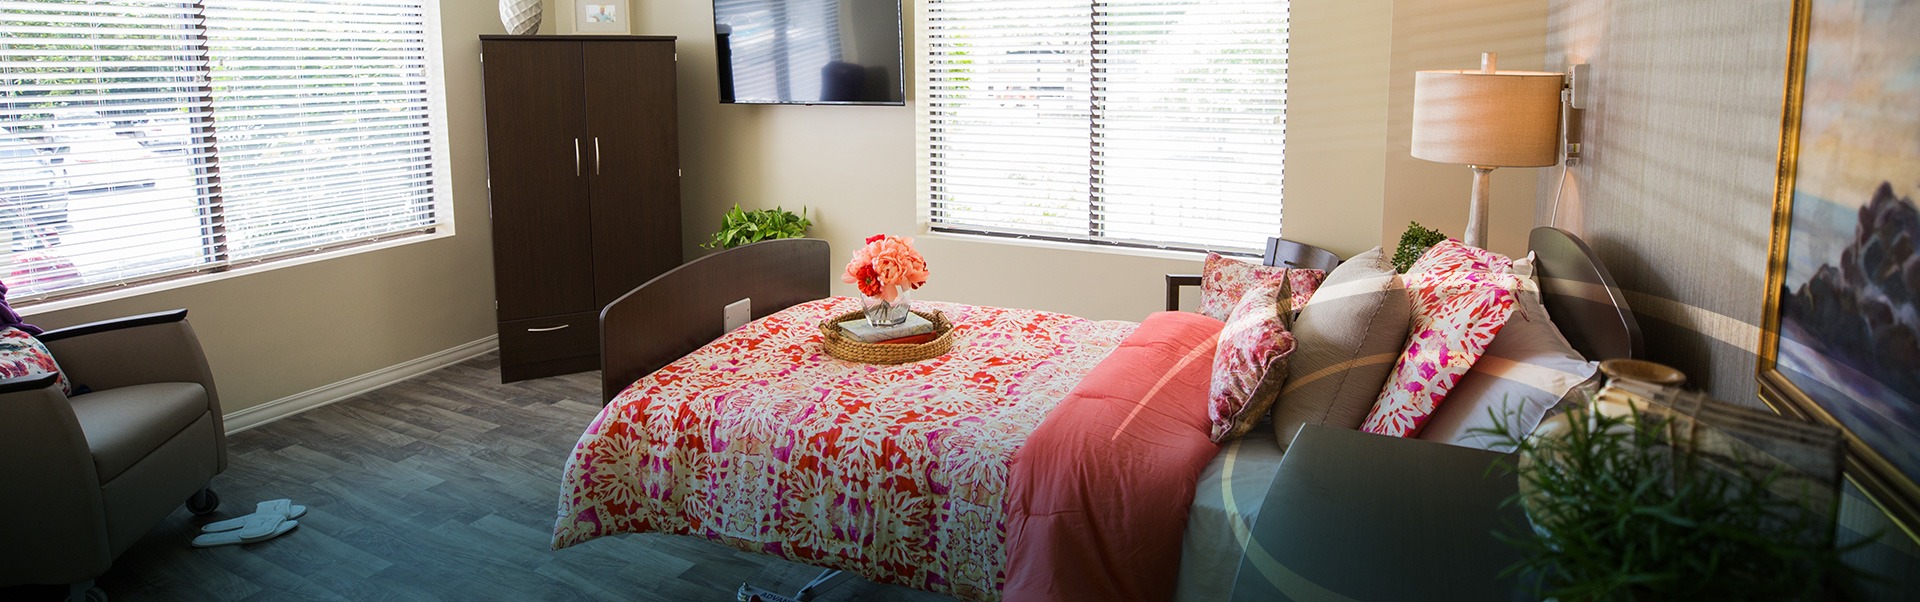 Bedroom with a rolling bed facing the window and an orange abstract bedspread